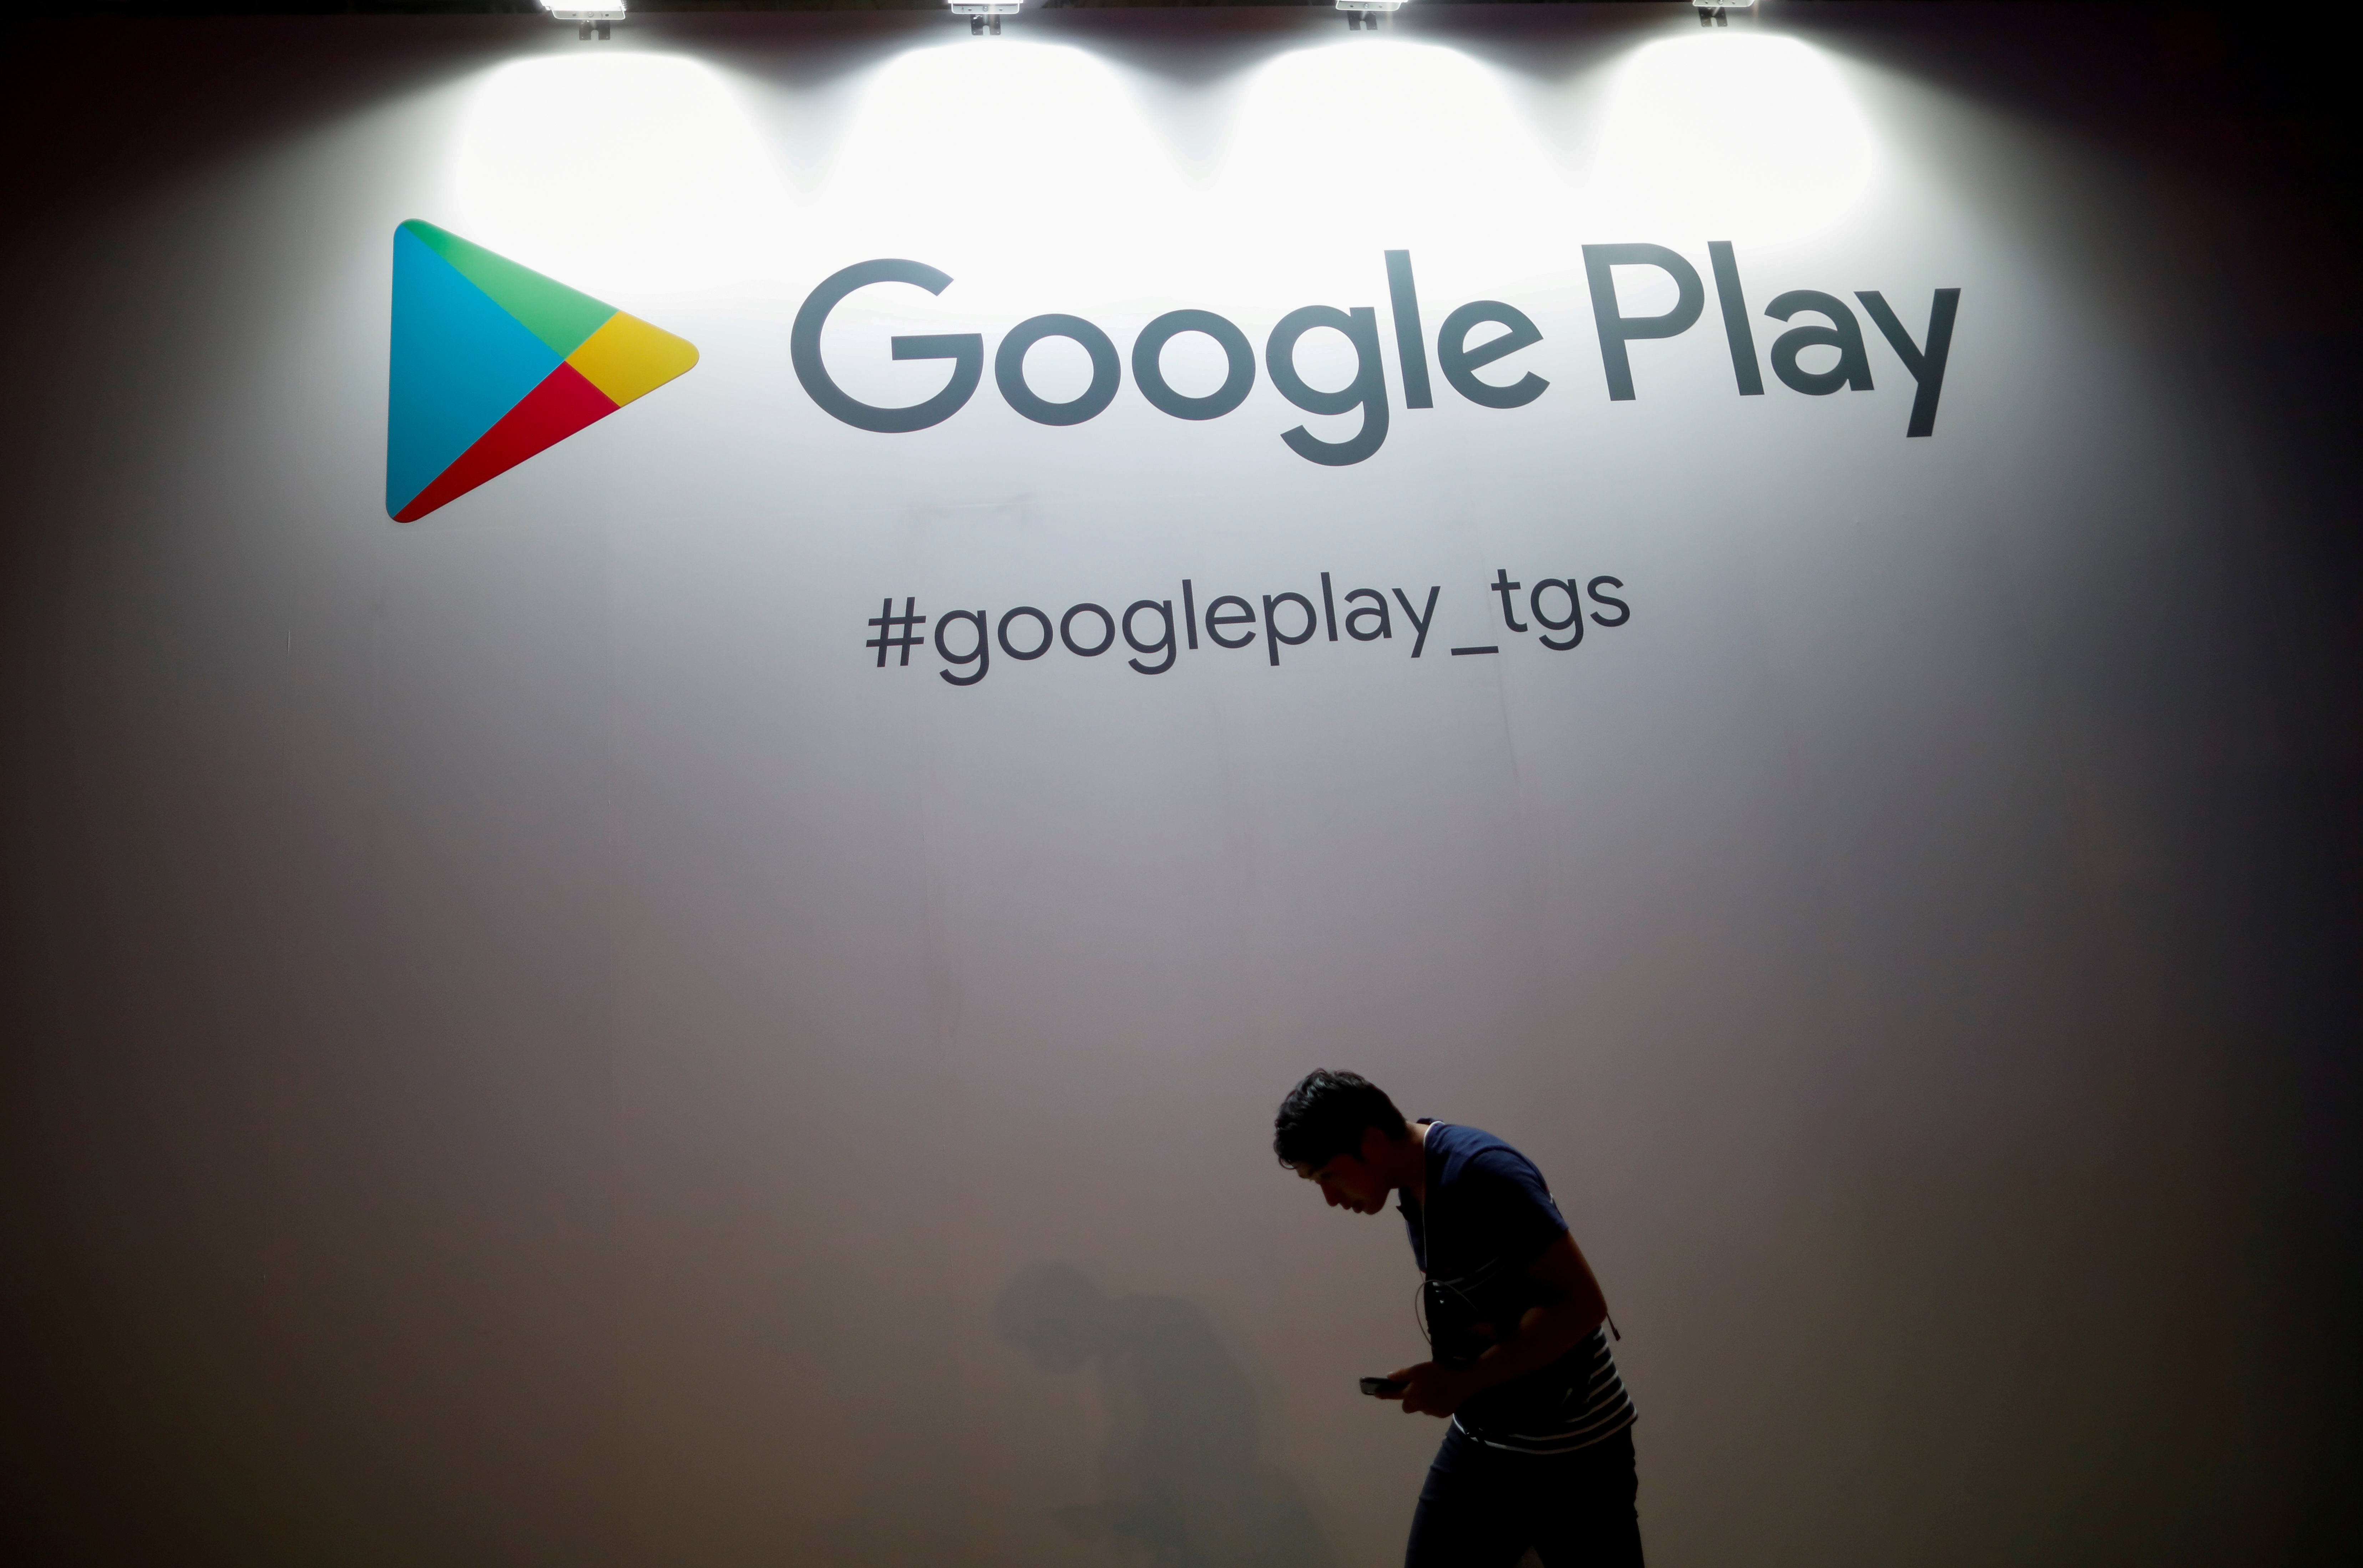 The logo of Google Play is displayed at Tokyo Game Show 2019 in Chiba